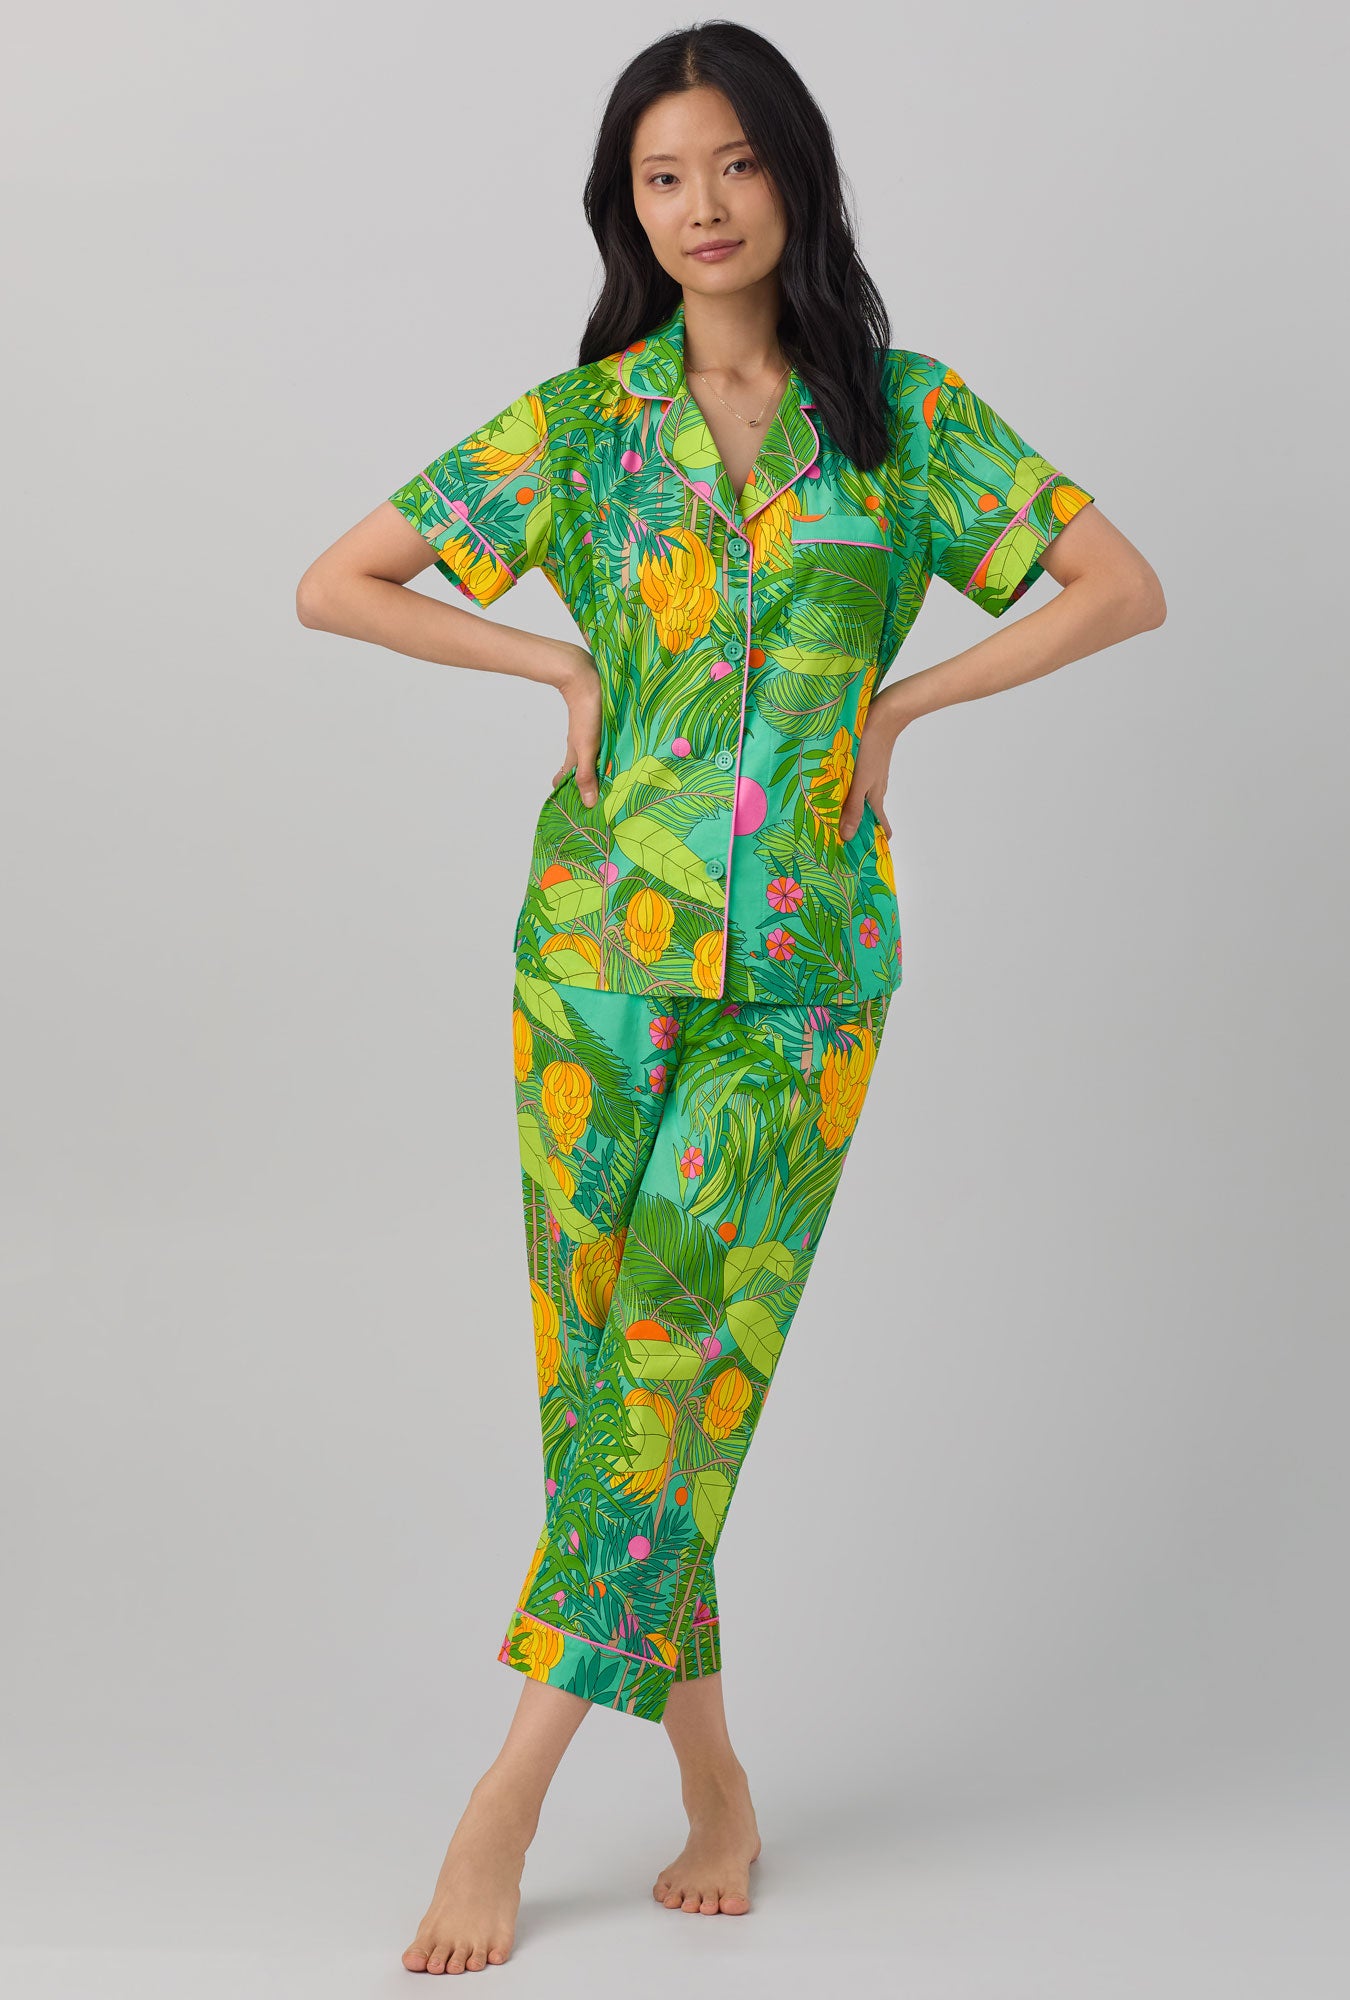 A lady wearing Short Sleeve Classic Woven Cotton Poplin Cropped PJ Set with going bananas print